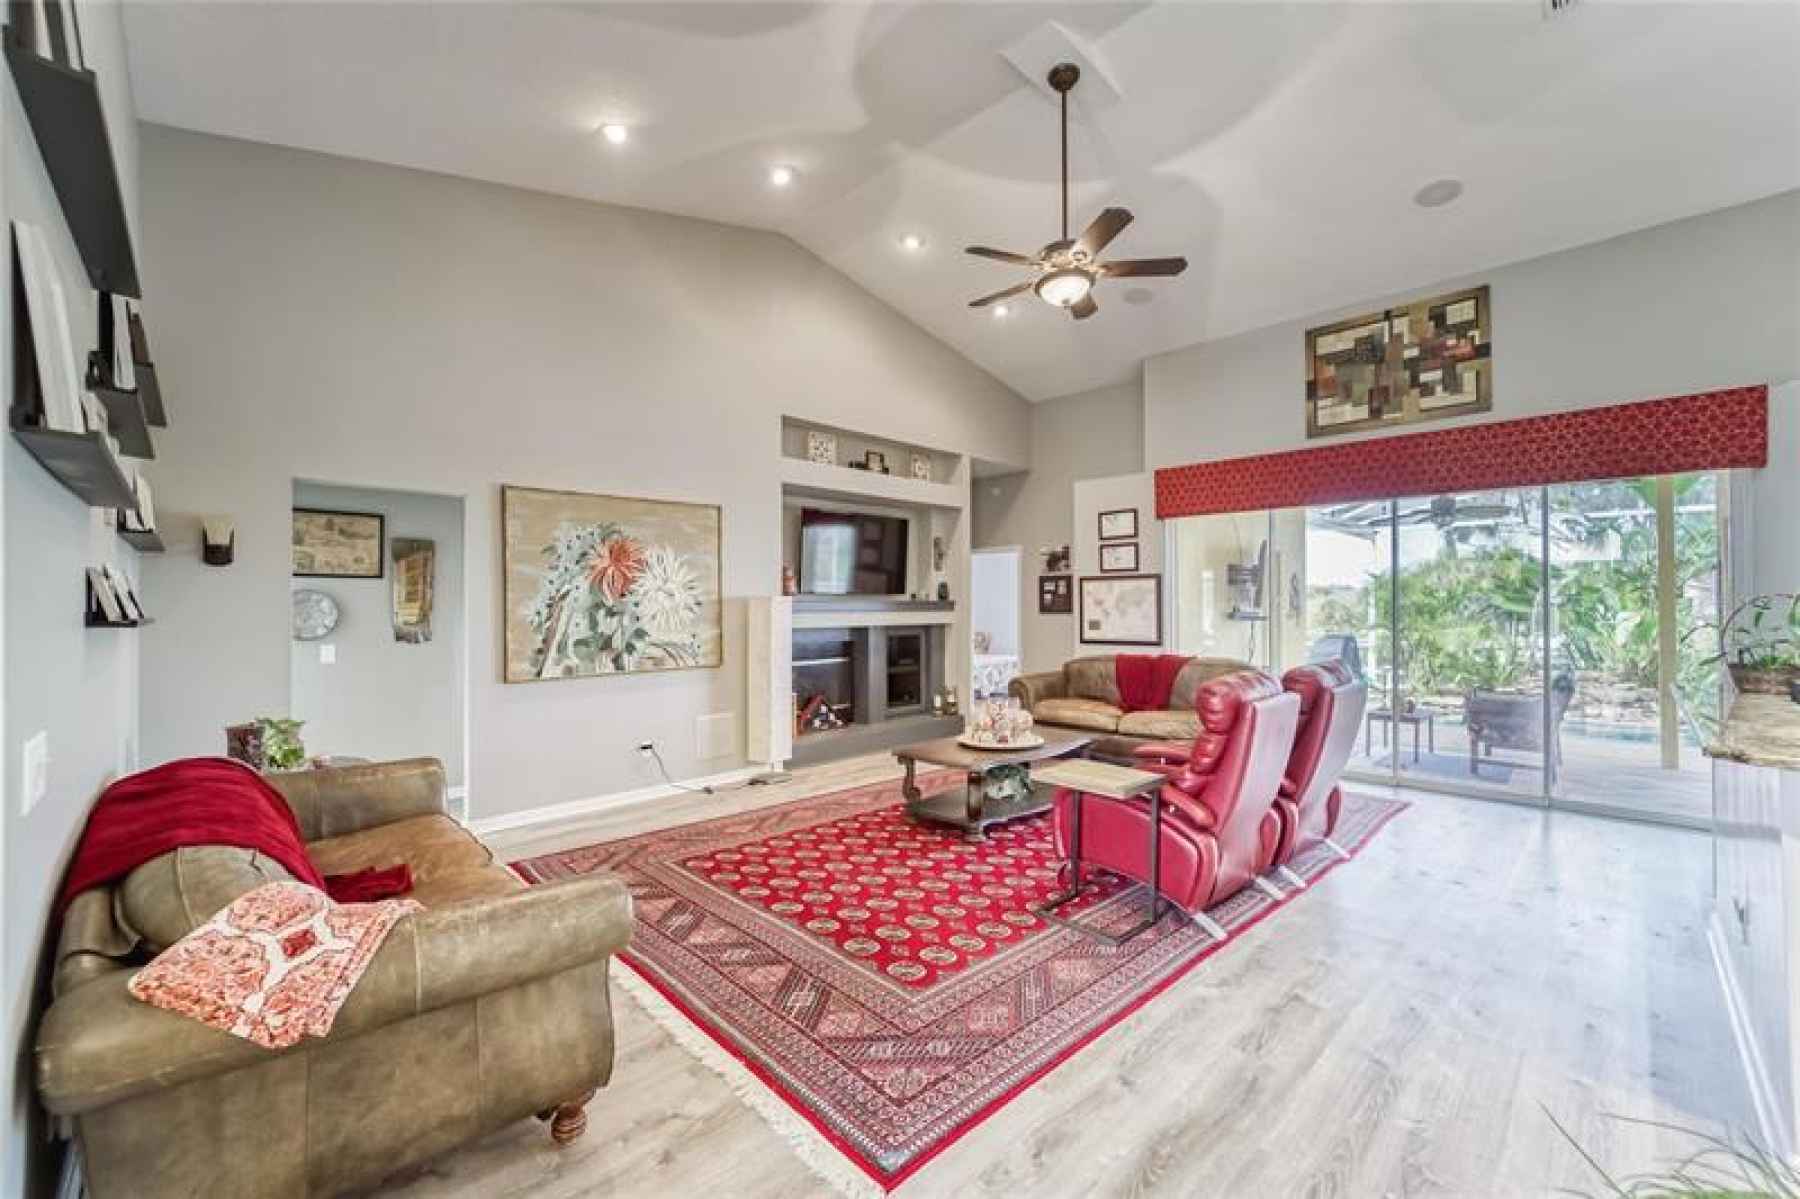 Great Room with High Cathedral Ceilings - Luxury Vinyl Flooring - Flush Mount Speakers - Fireplace